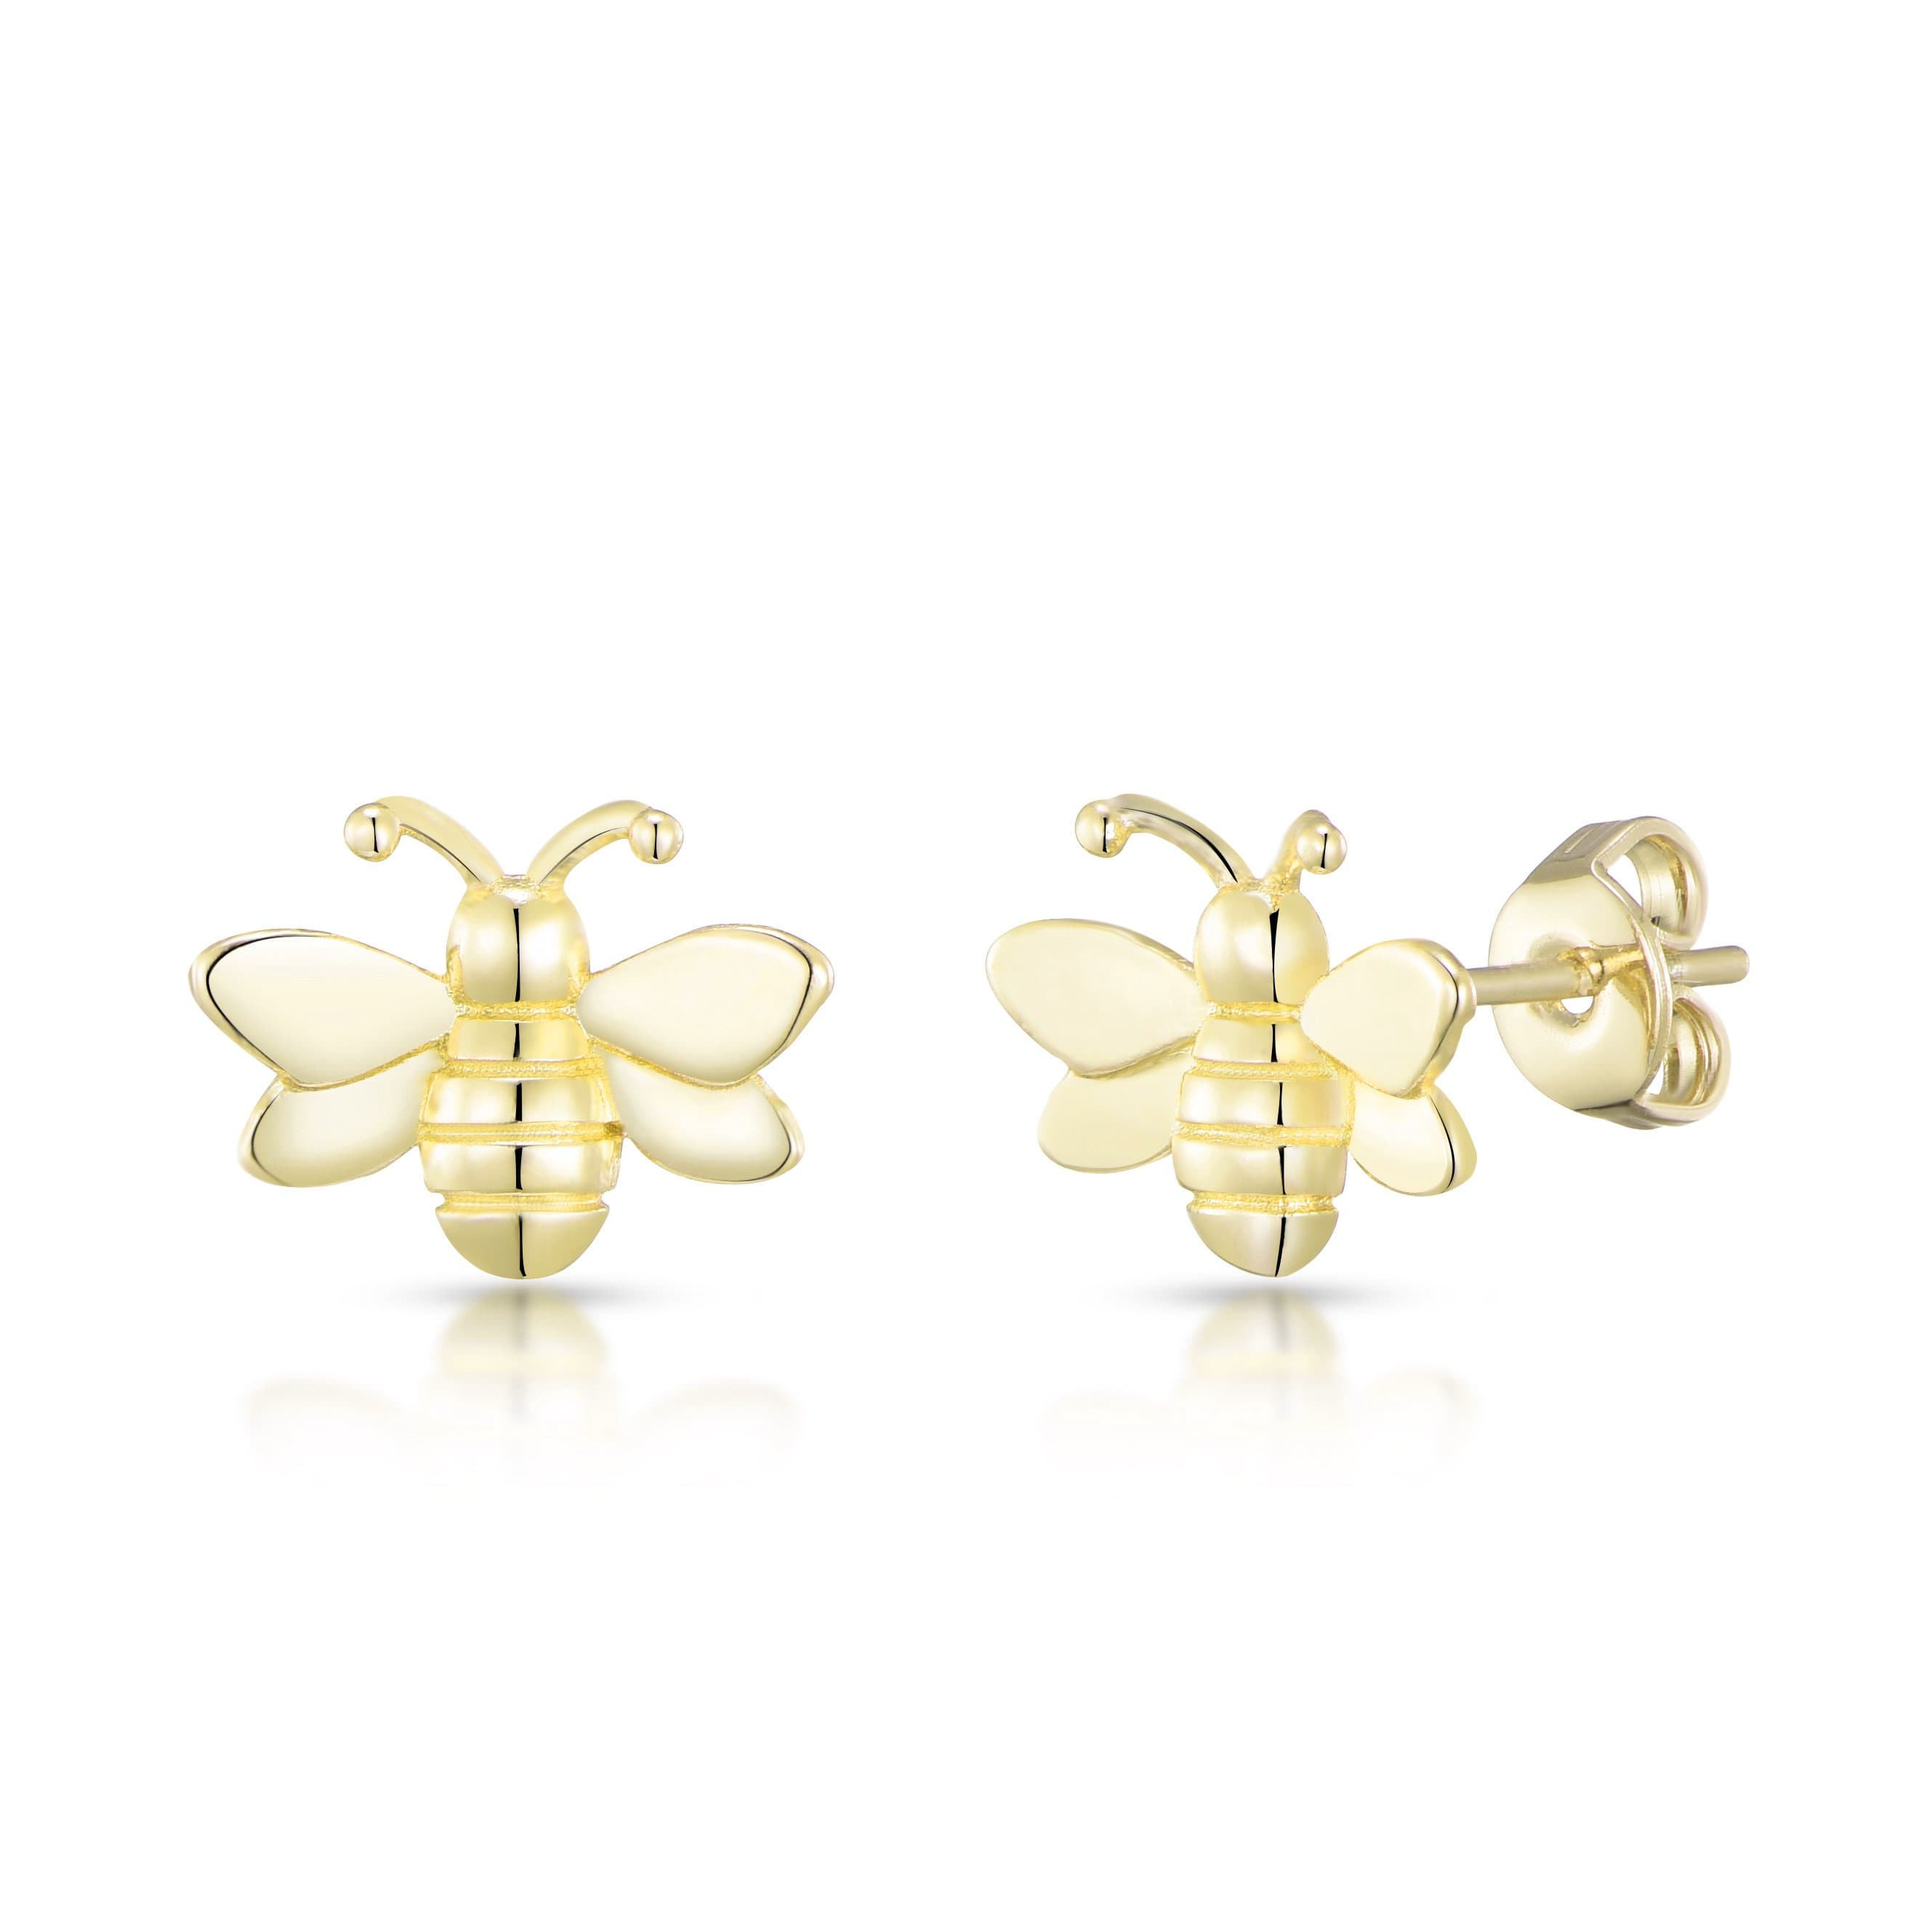 Gold Plated Bumble Bee Earrings by Philip Jones Jewellery